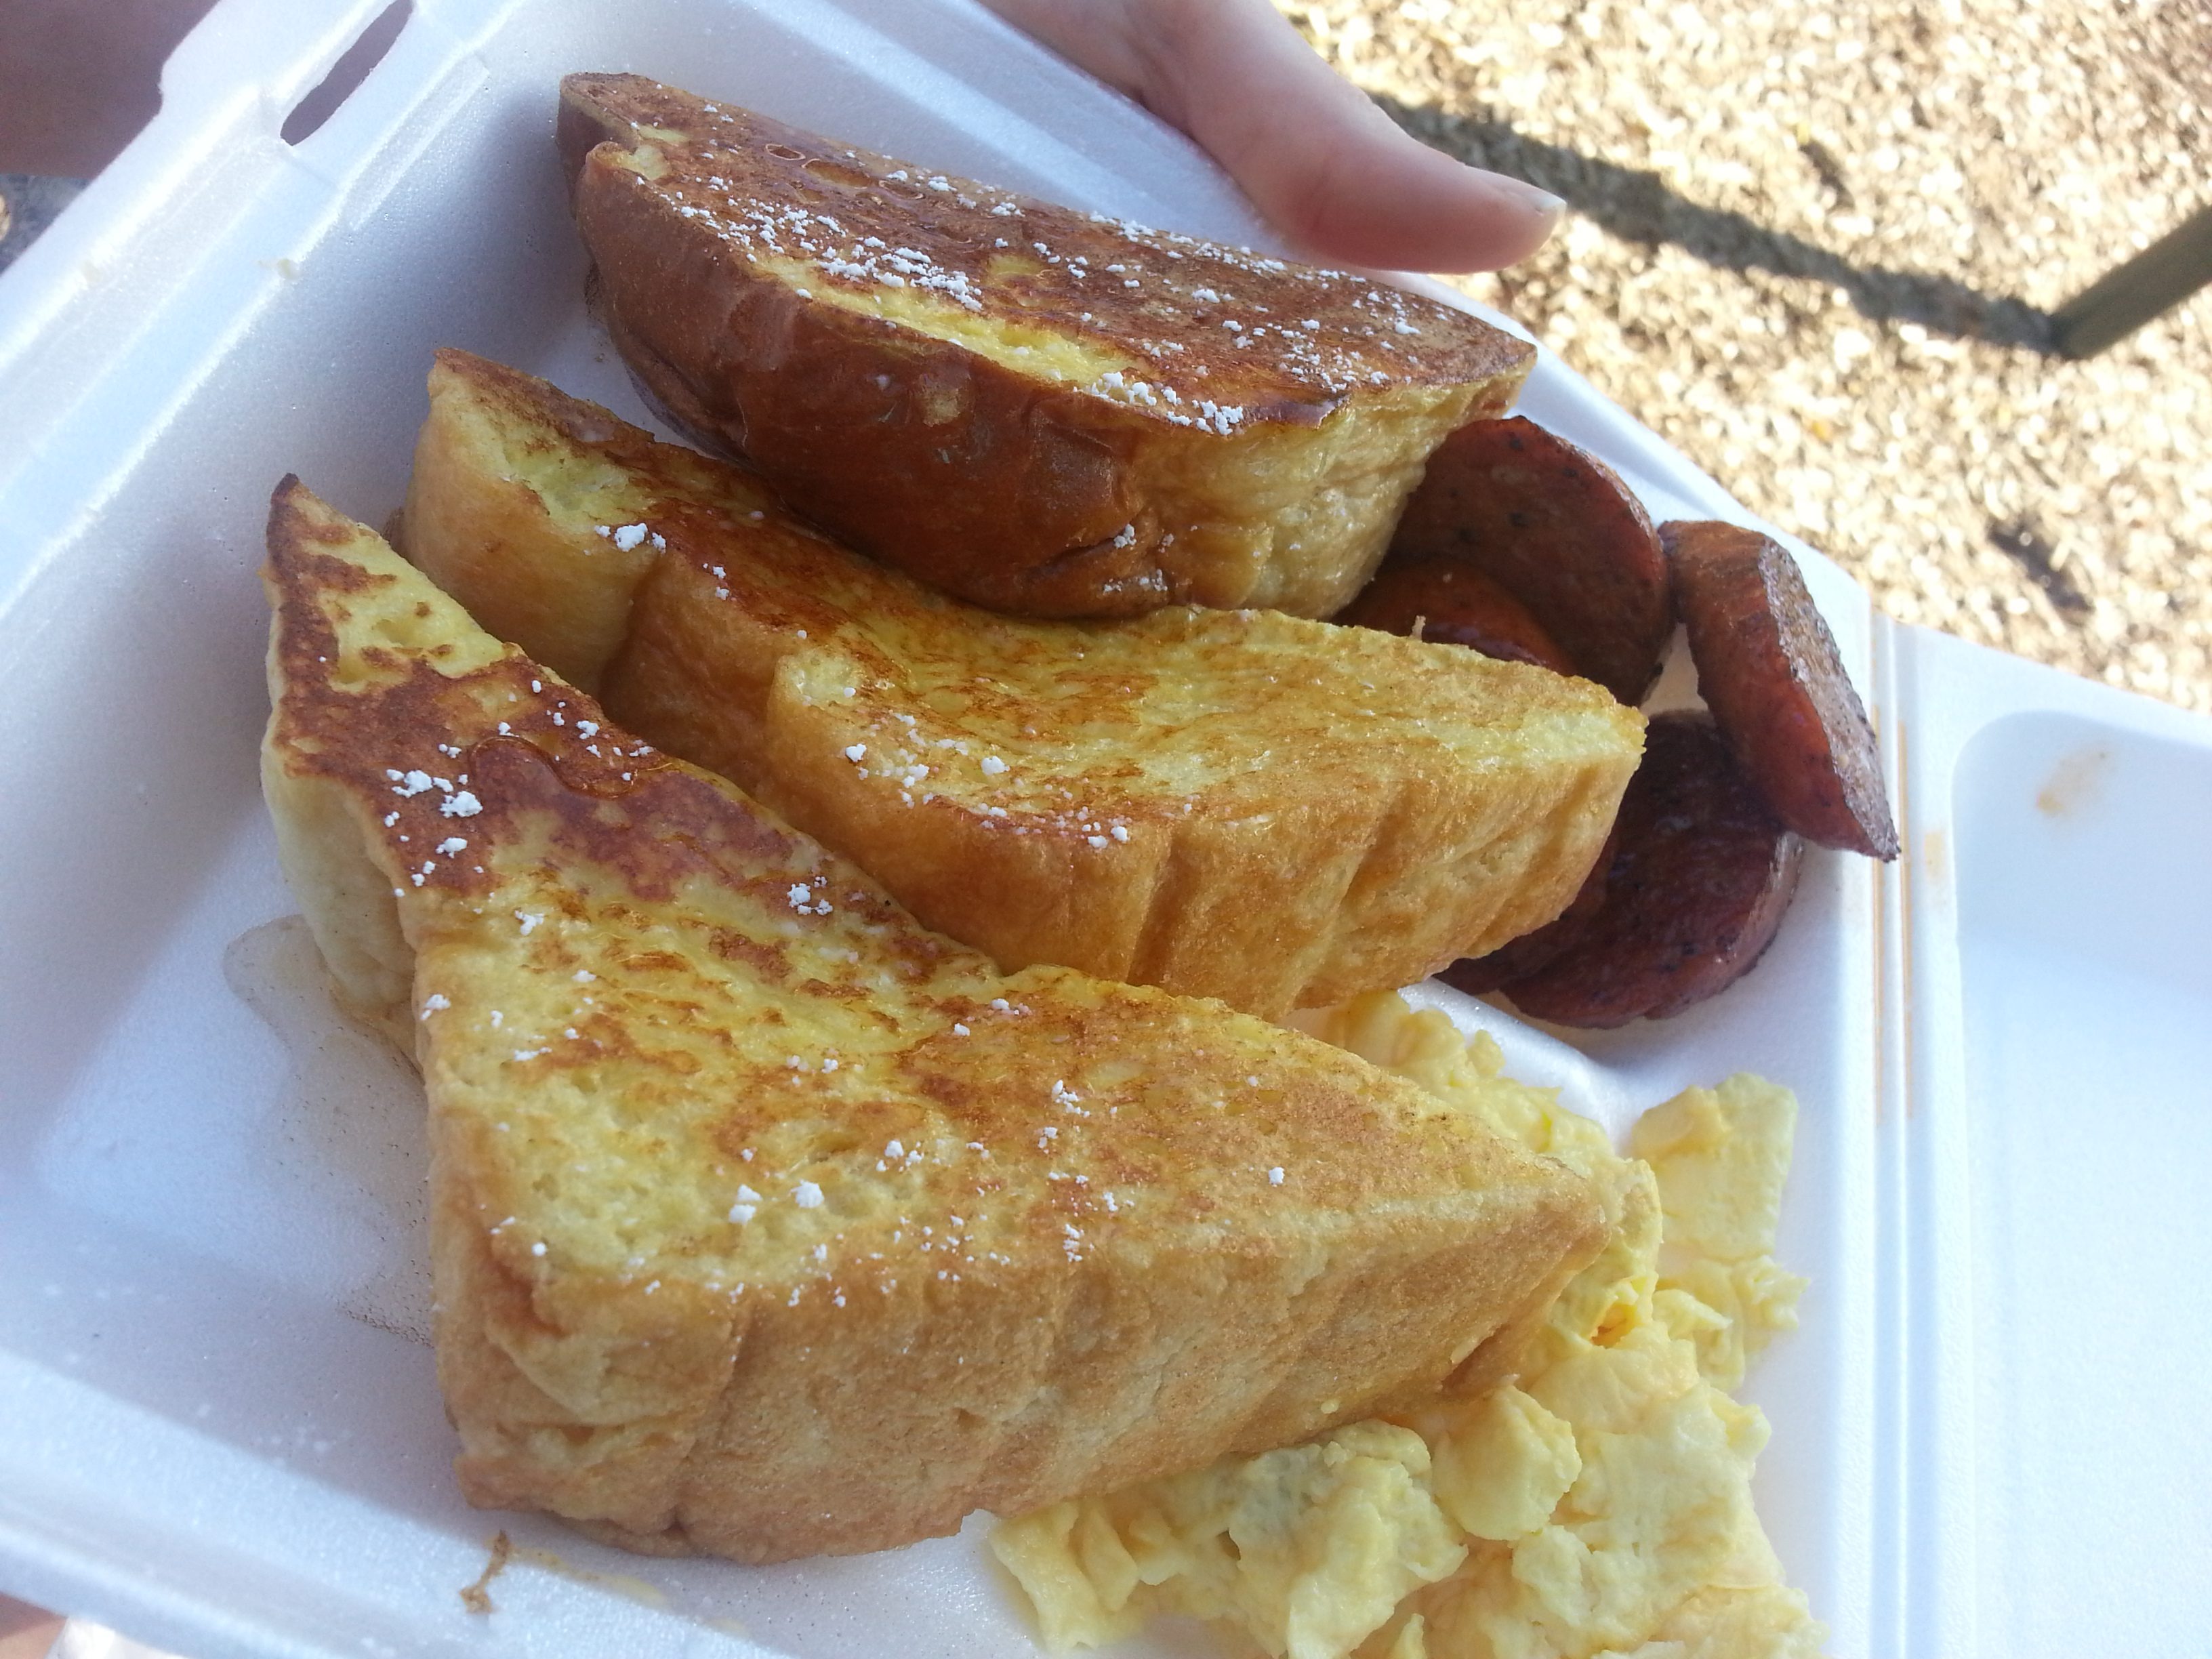 French toast, eggs, and sausage in a styrofoam container.